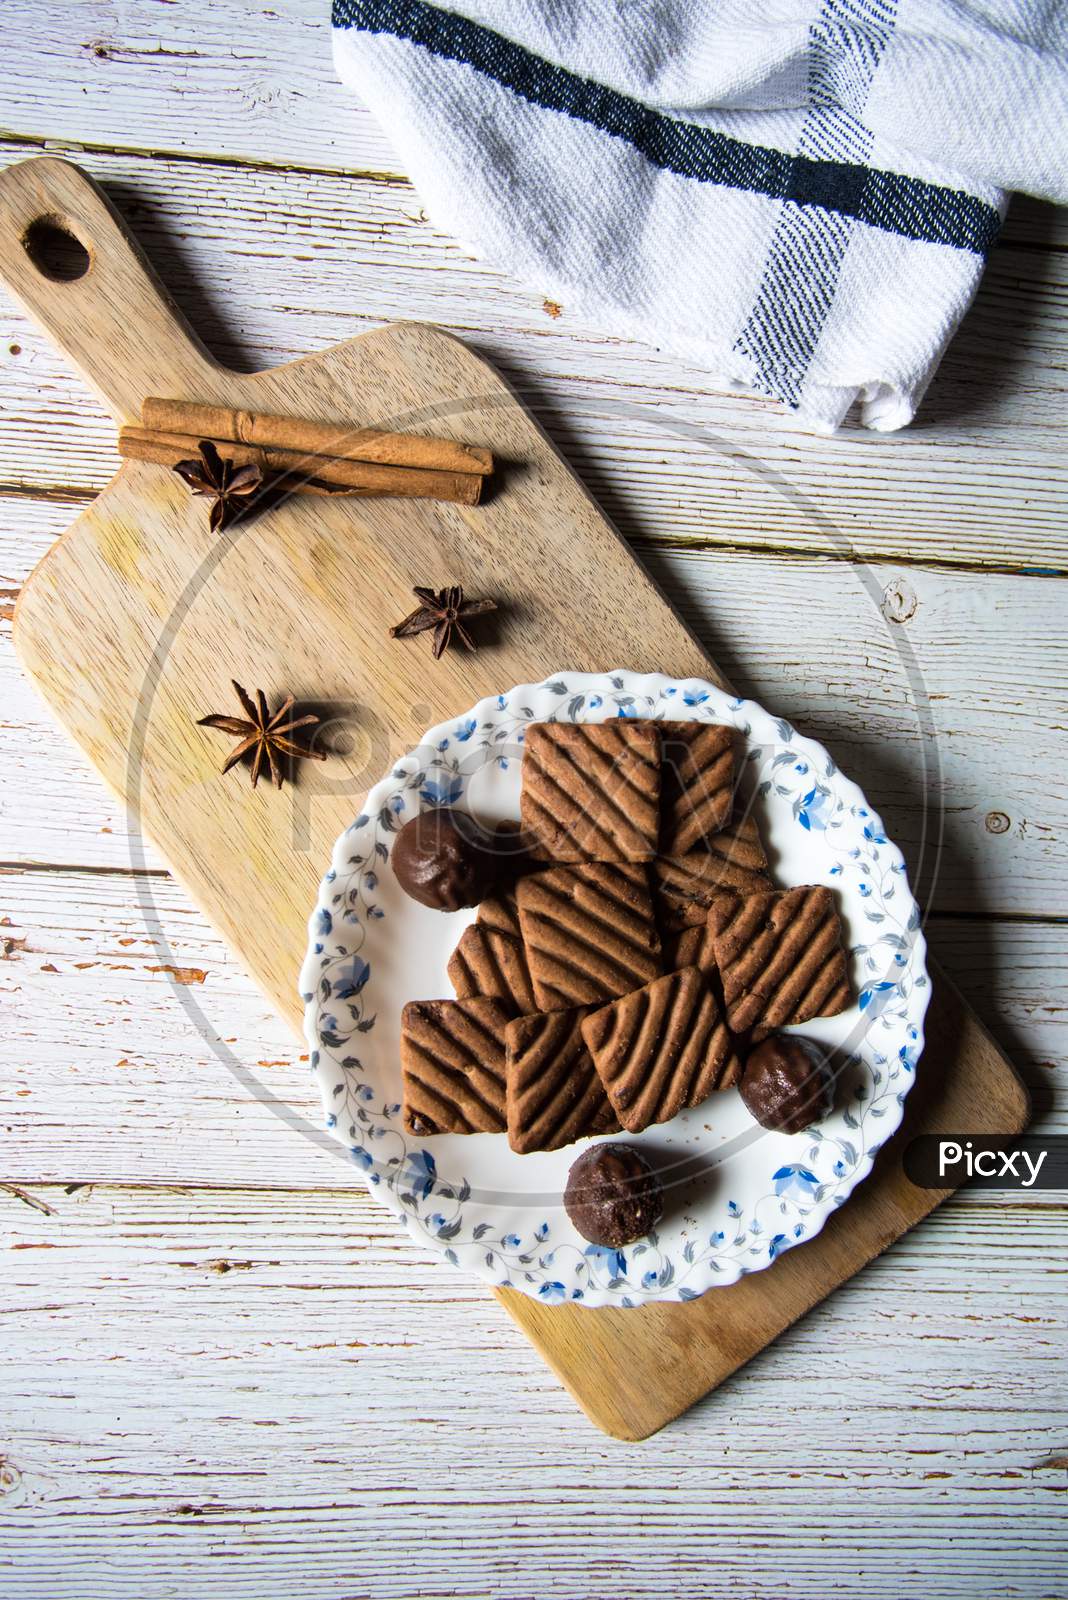 Tasty chocolate cookies and chocolates on a wooden platter